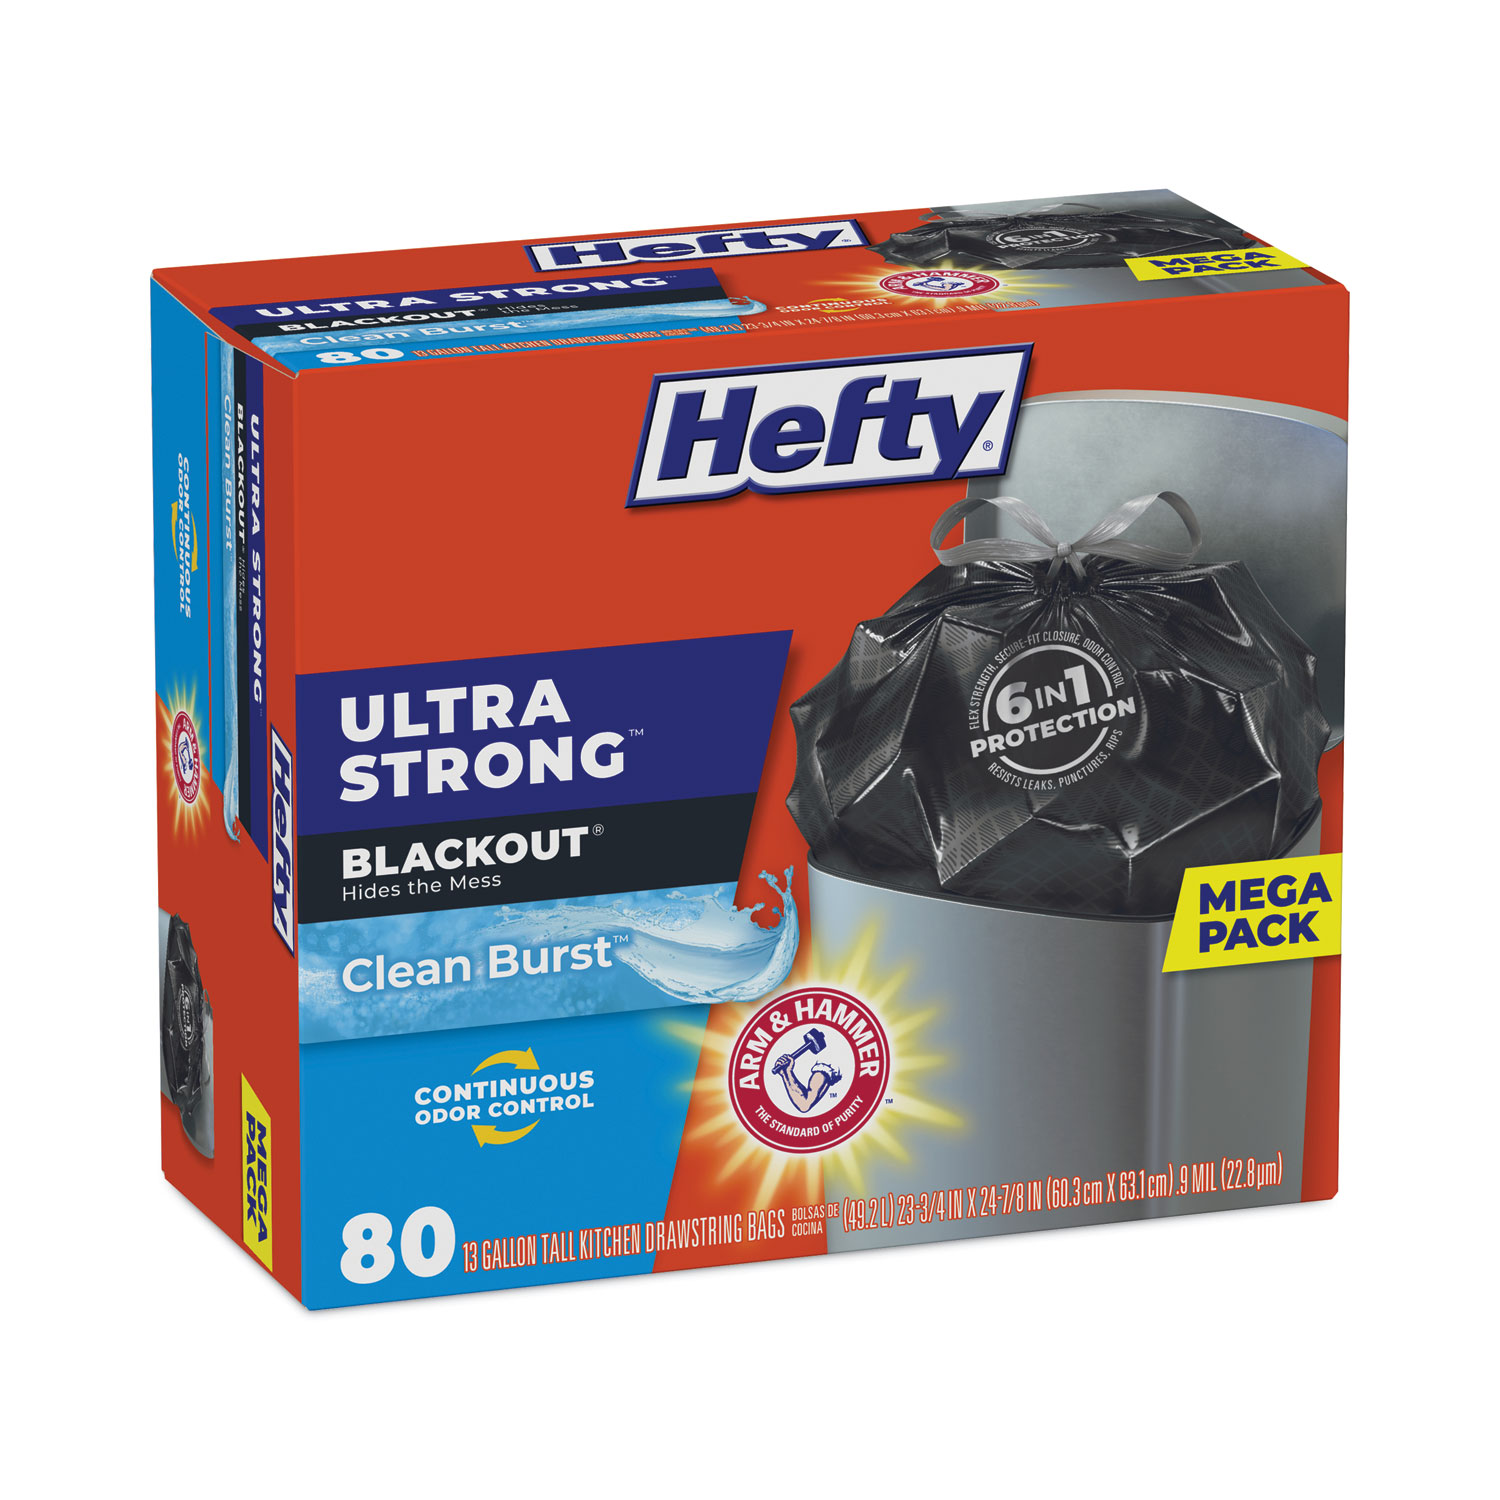 Hefty Ultra Strong Tall Kitchen Bags, Drawstring, Scent Free, 13 Gallon - 150 bags